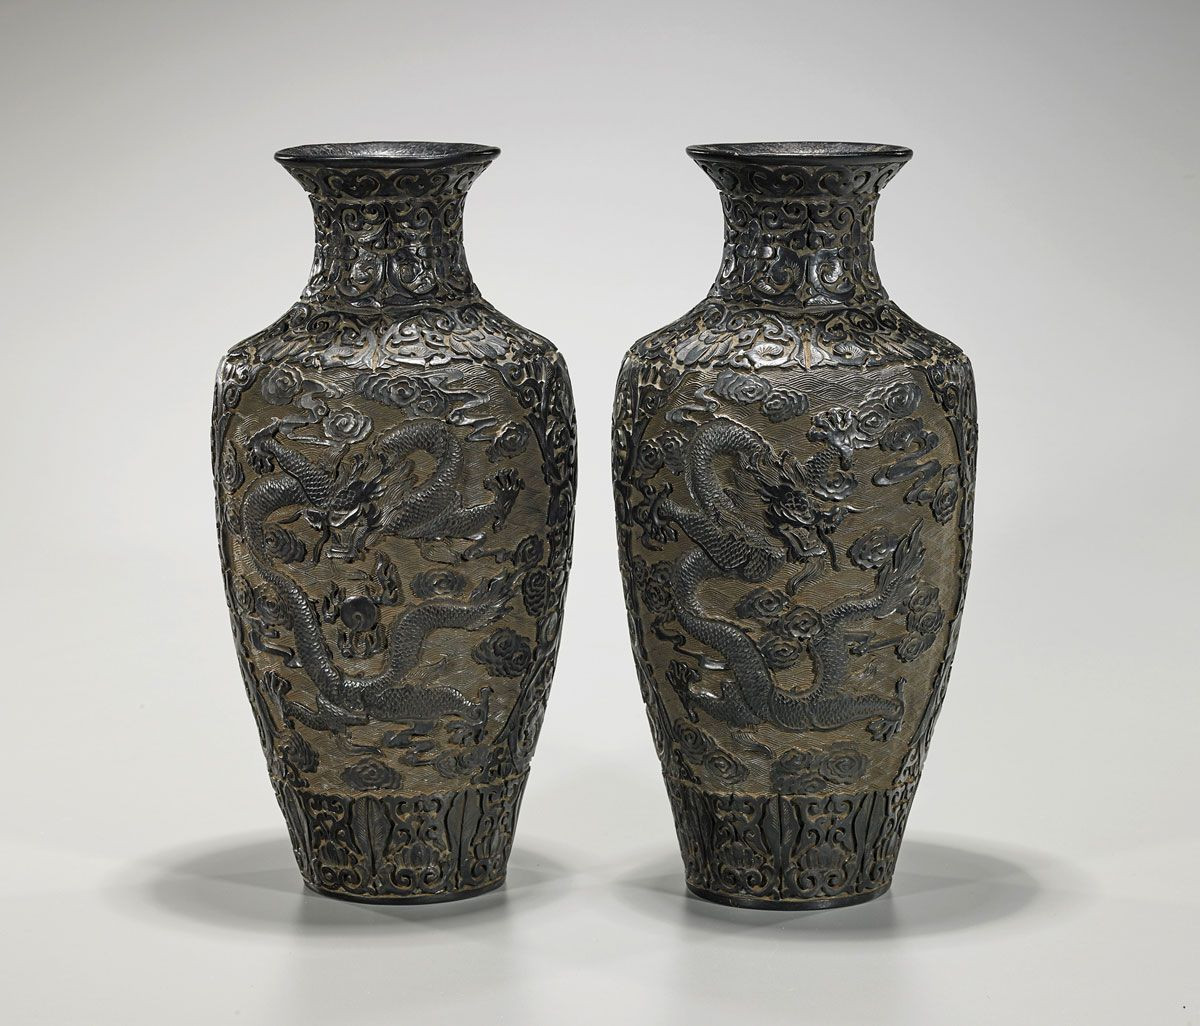 17 Stylish Chinese Red Lacquer Vase 2024 free download chinese red lacquer vase of oriental vase stands image 13 chinese vase with dragon handles dark with regard to oriental vase stands images pair of chinese lacquer like vases each of ovoid fo